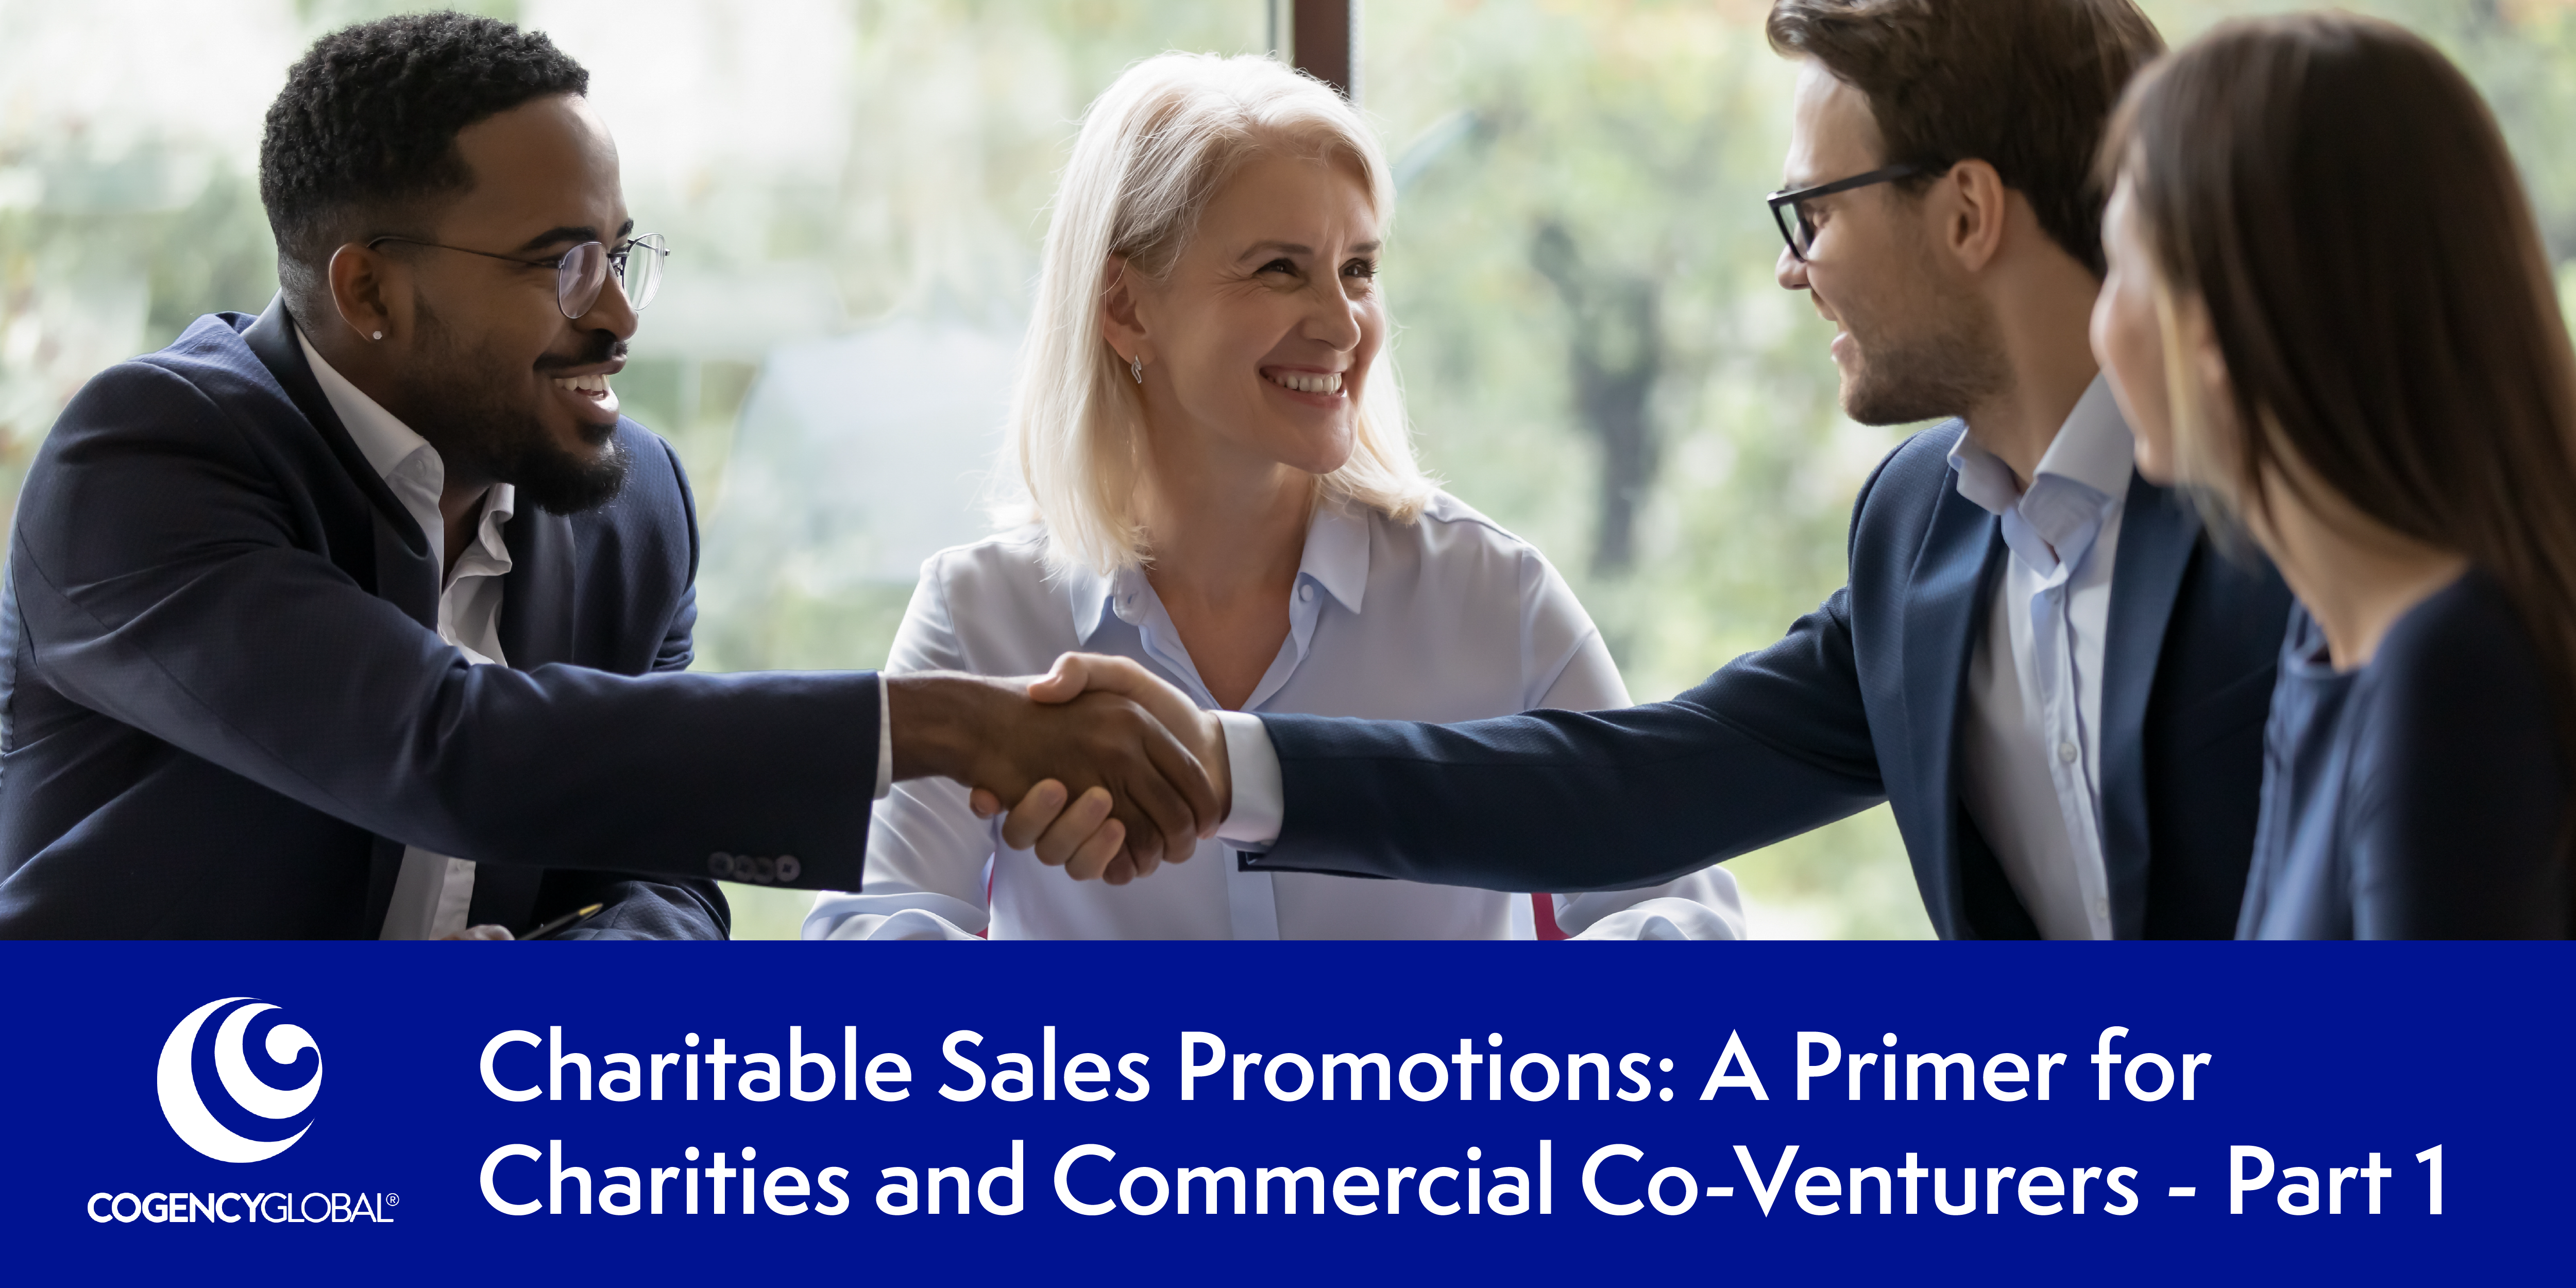 Charitable Sales Promotions: A Primer for Charities and Commercial Co-venturers - Part 1